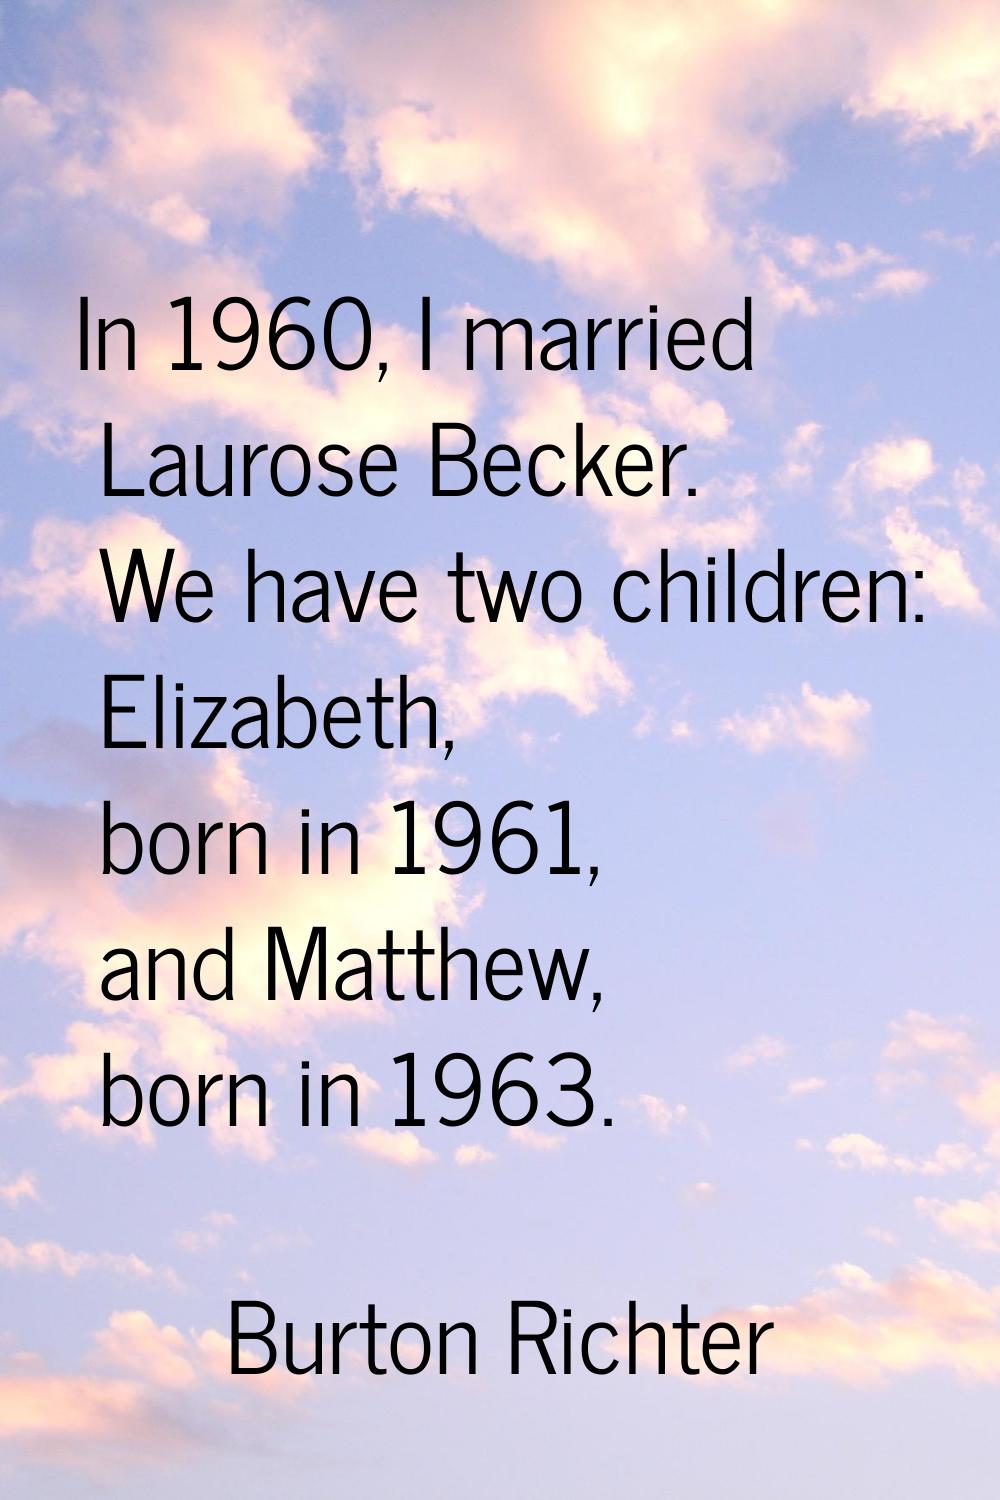 In 1960, I married Laurose Becker. We have two children: Elizabeth, born in 1961, and Matthew, born